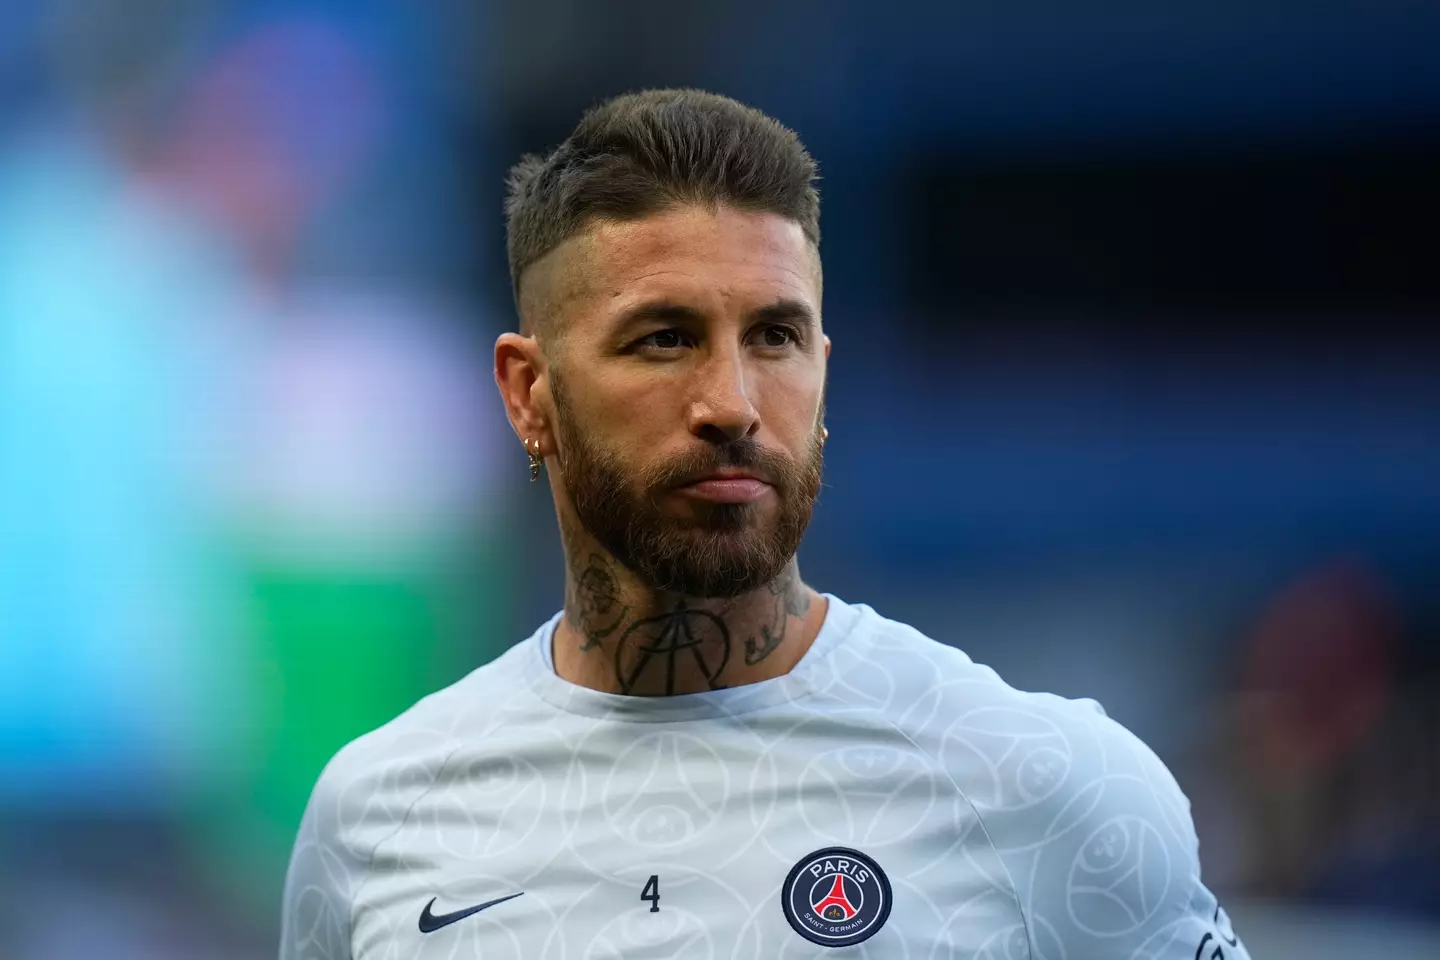 Ramos' second season in Paris is going better than his first. (Image